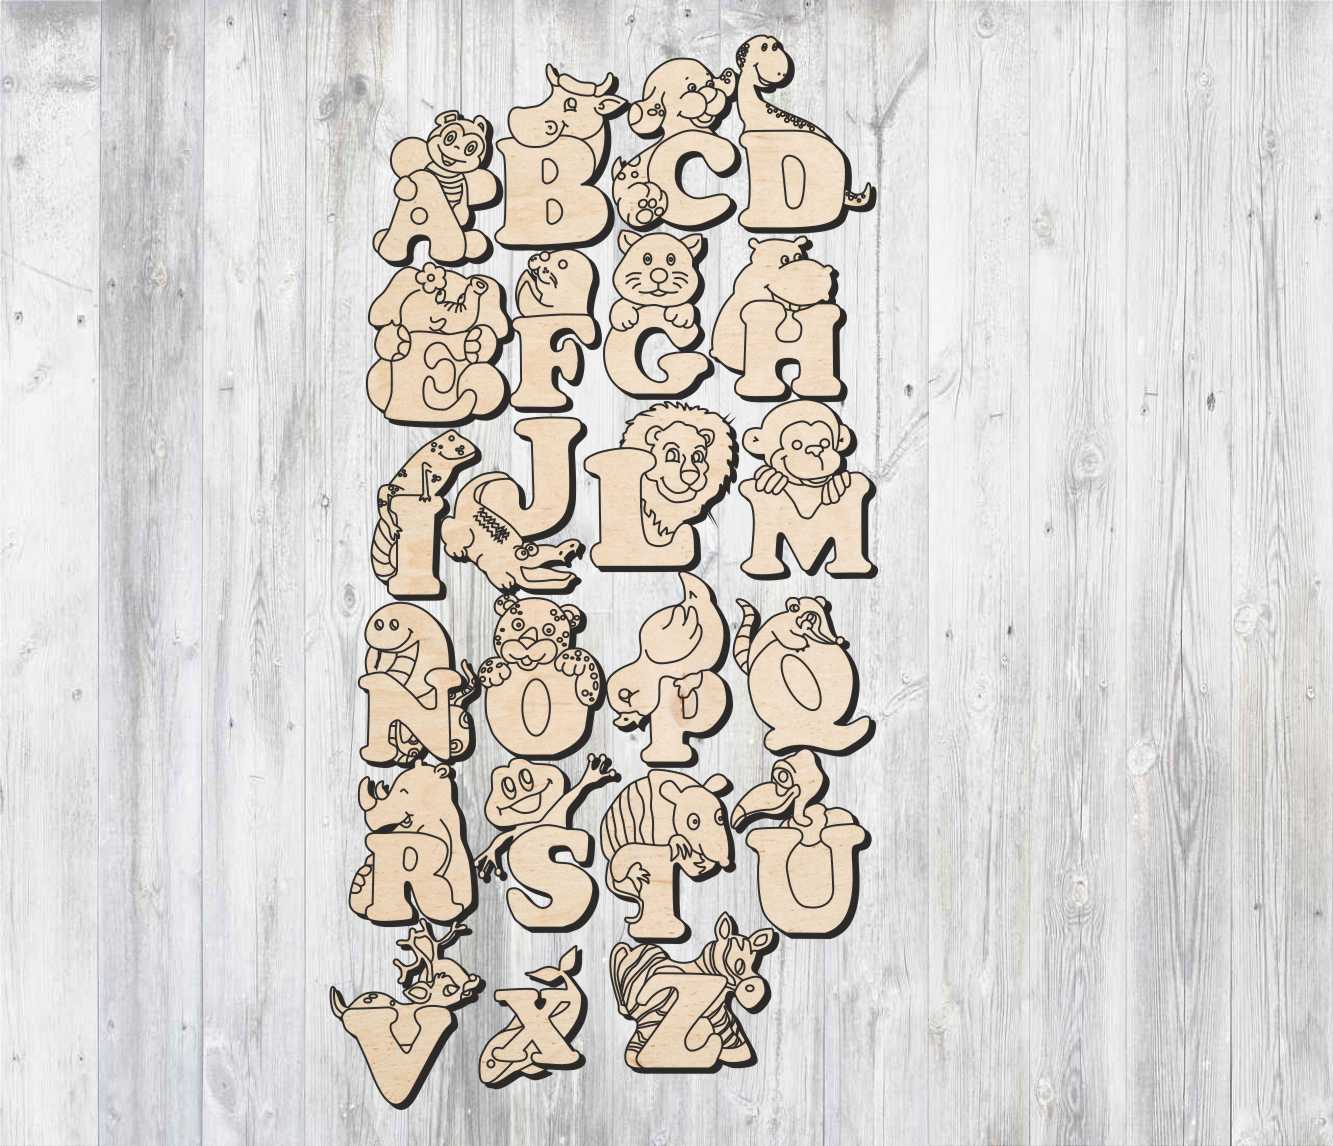 Laser Cut English Letters Alphabet Shapes Free Vector